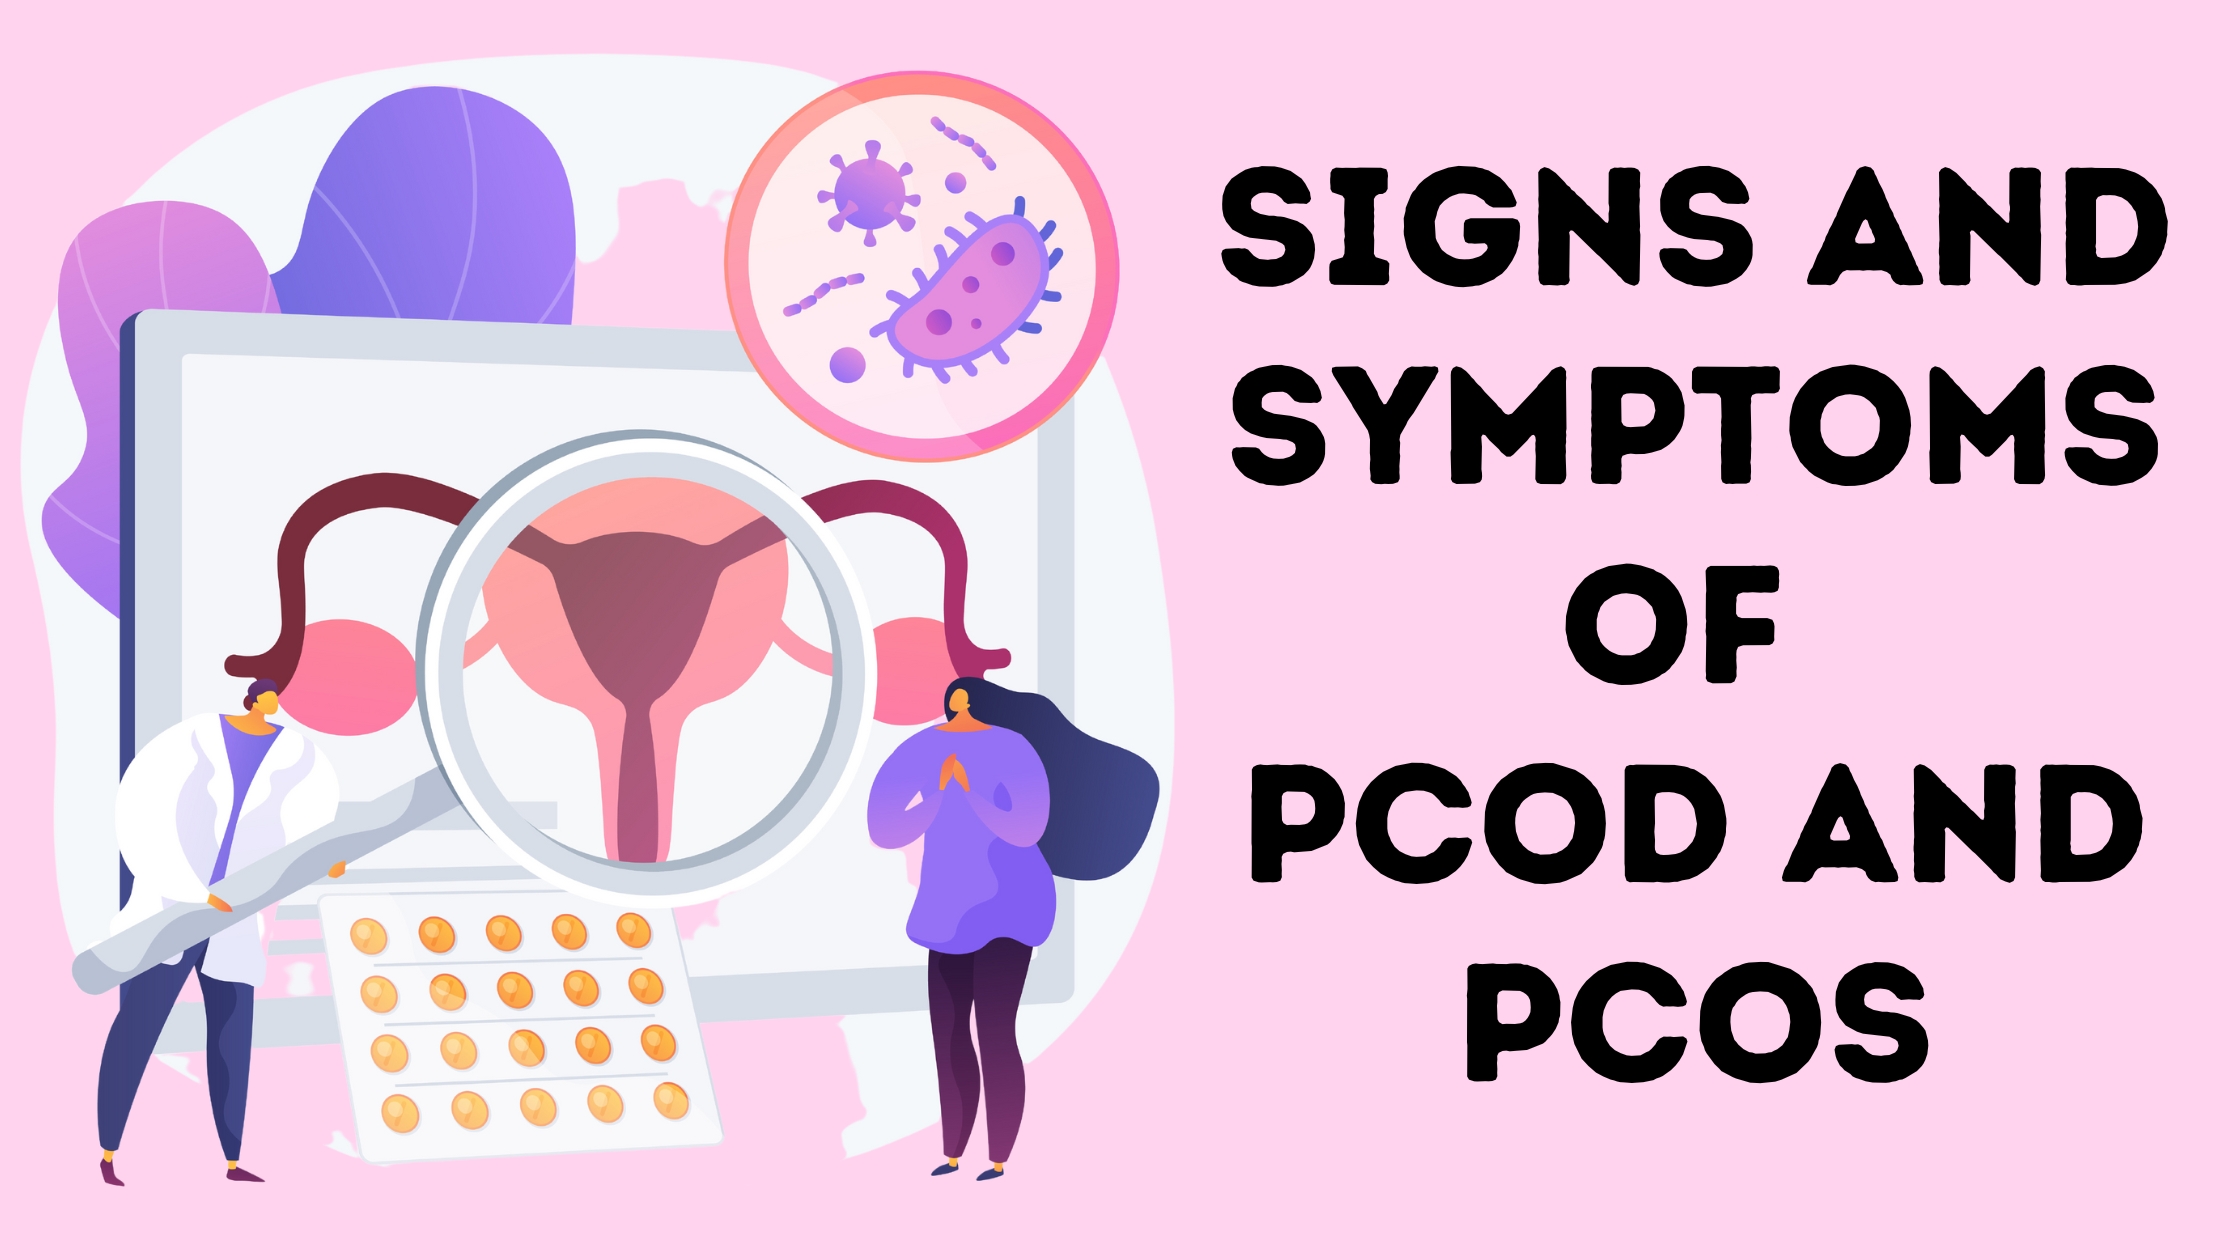 Signs and symptoms of PCOD and PCOS